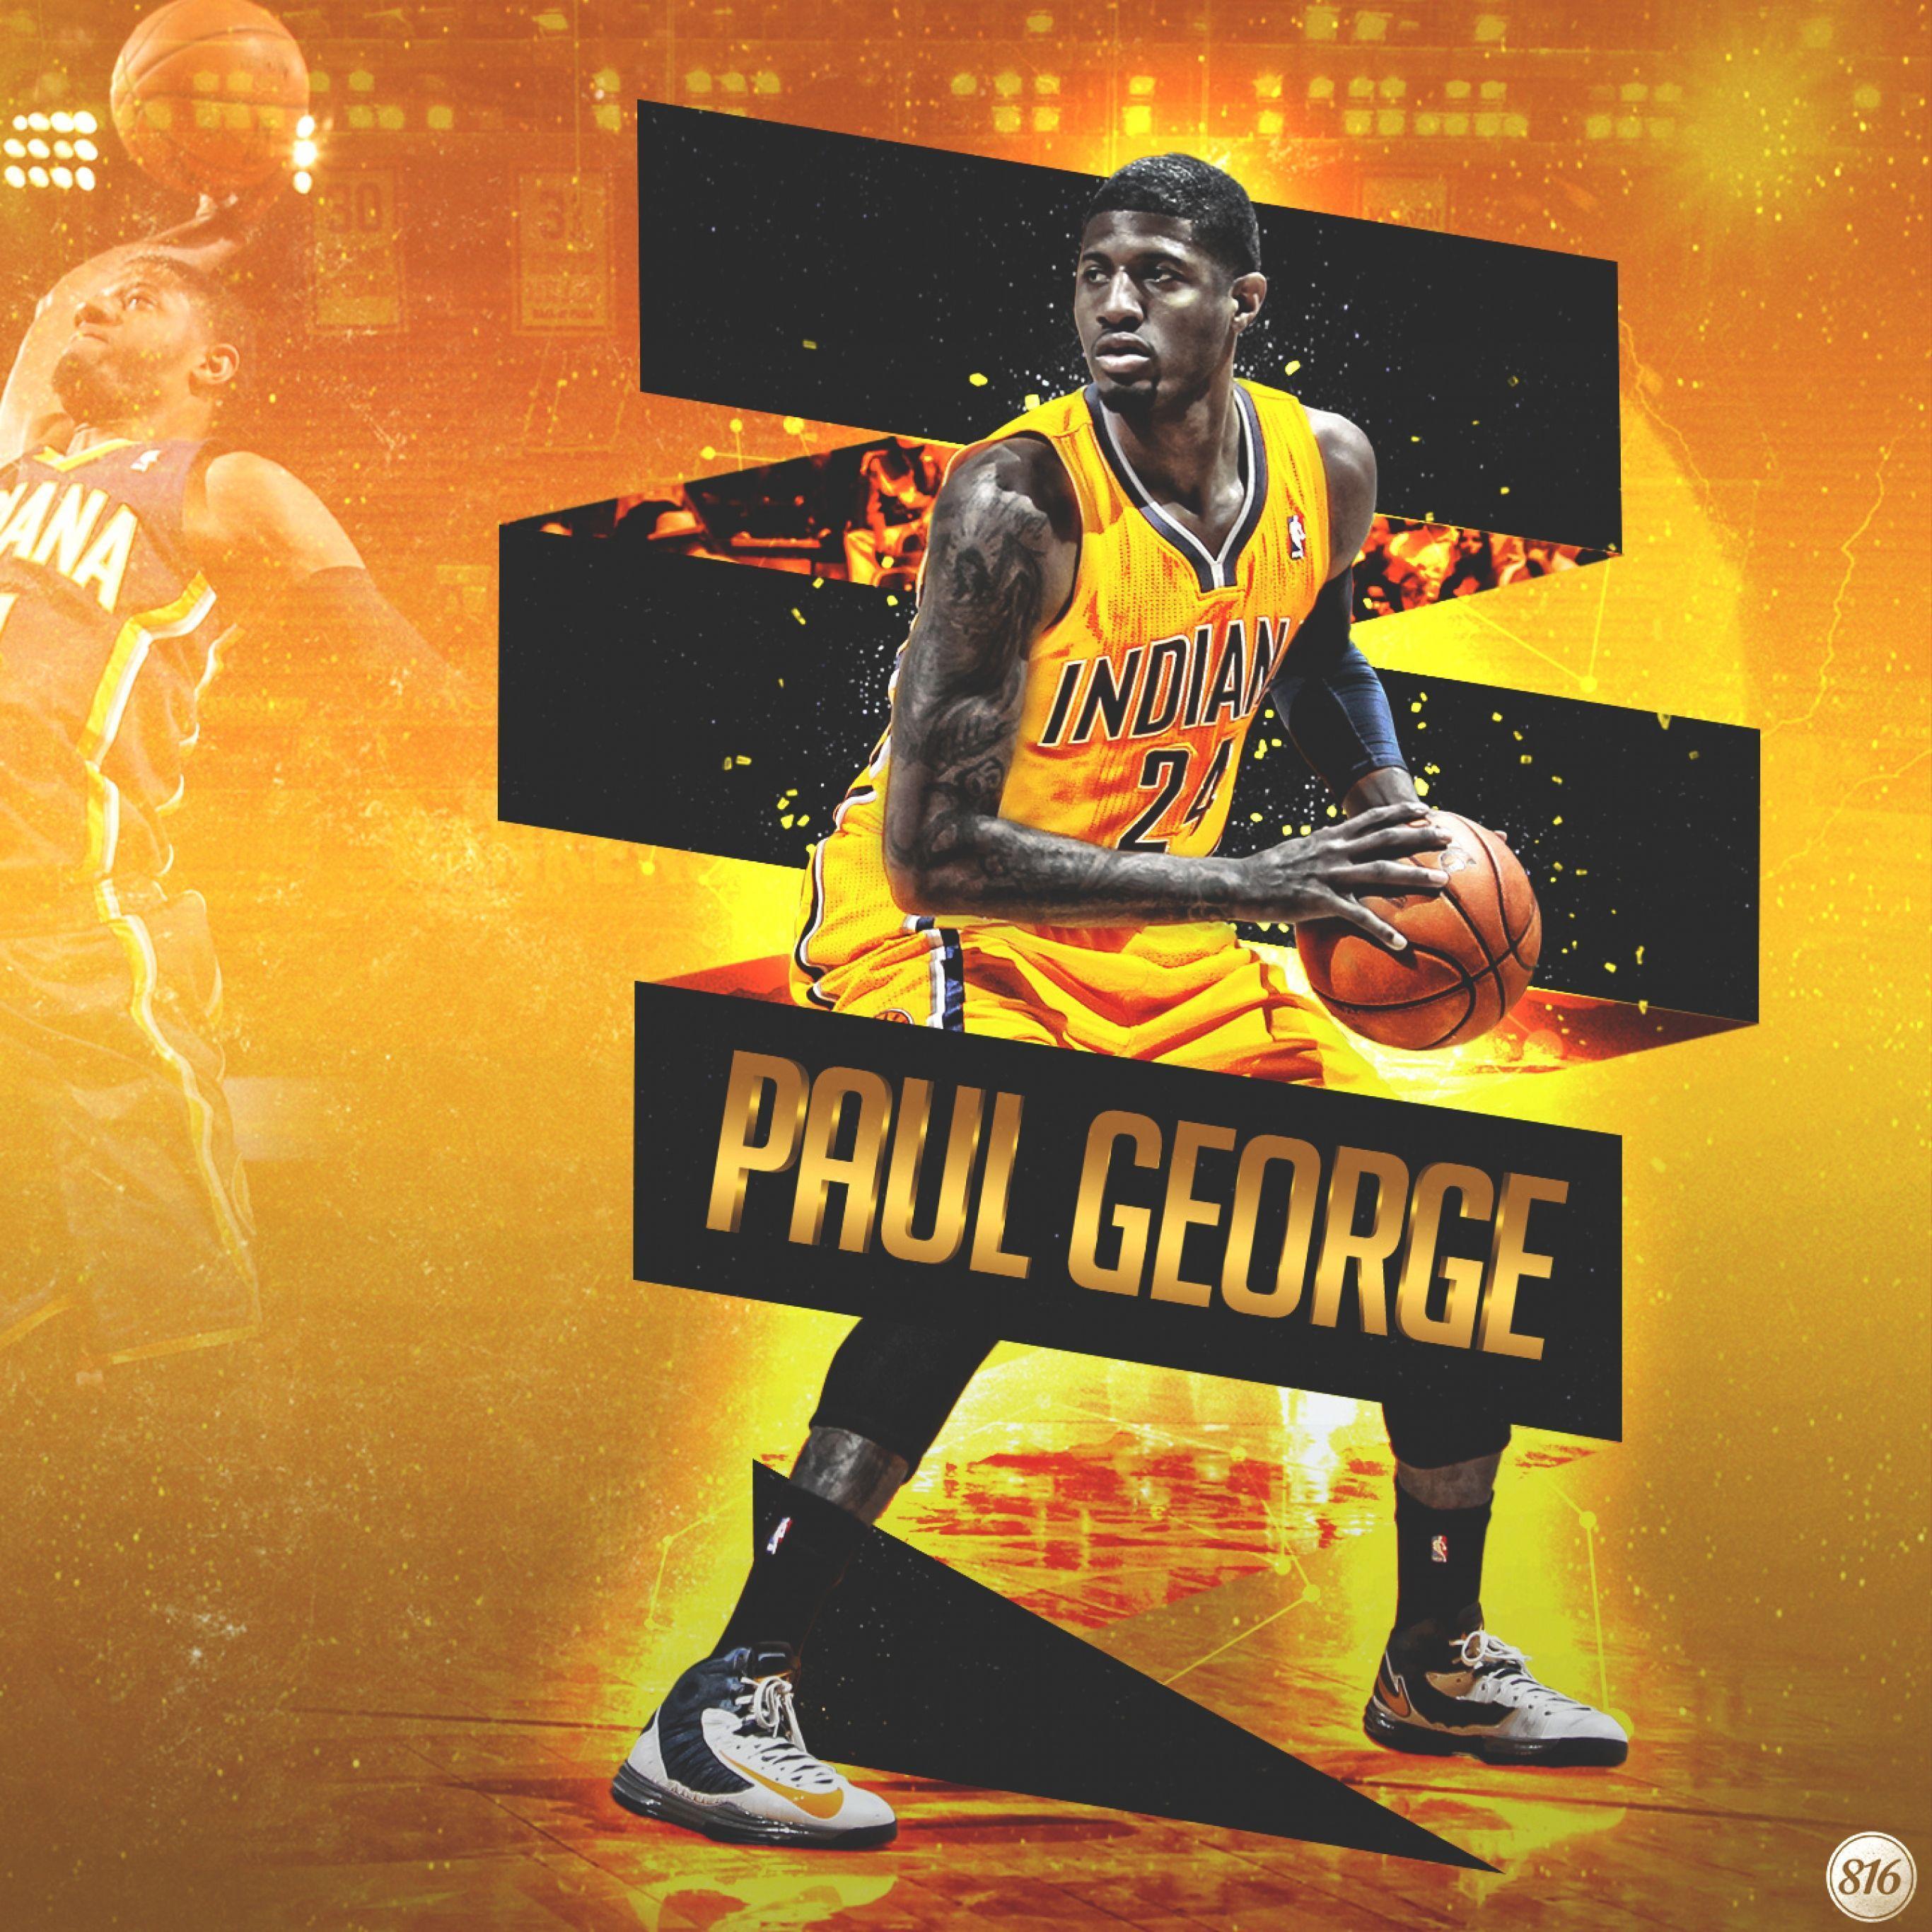 Download Wallpaper 2732x2732 Paul george, Indiana, Pacers